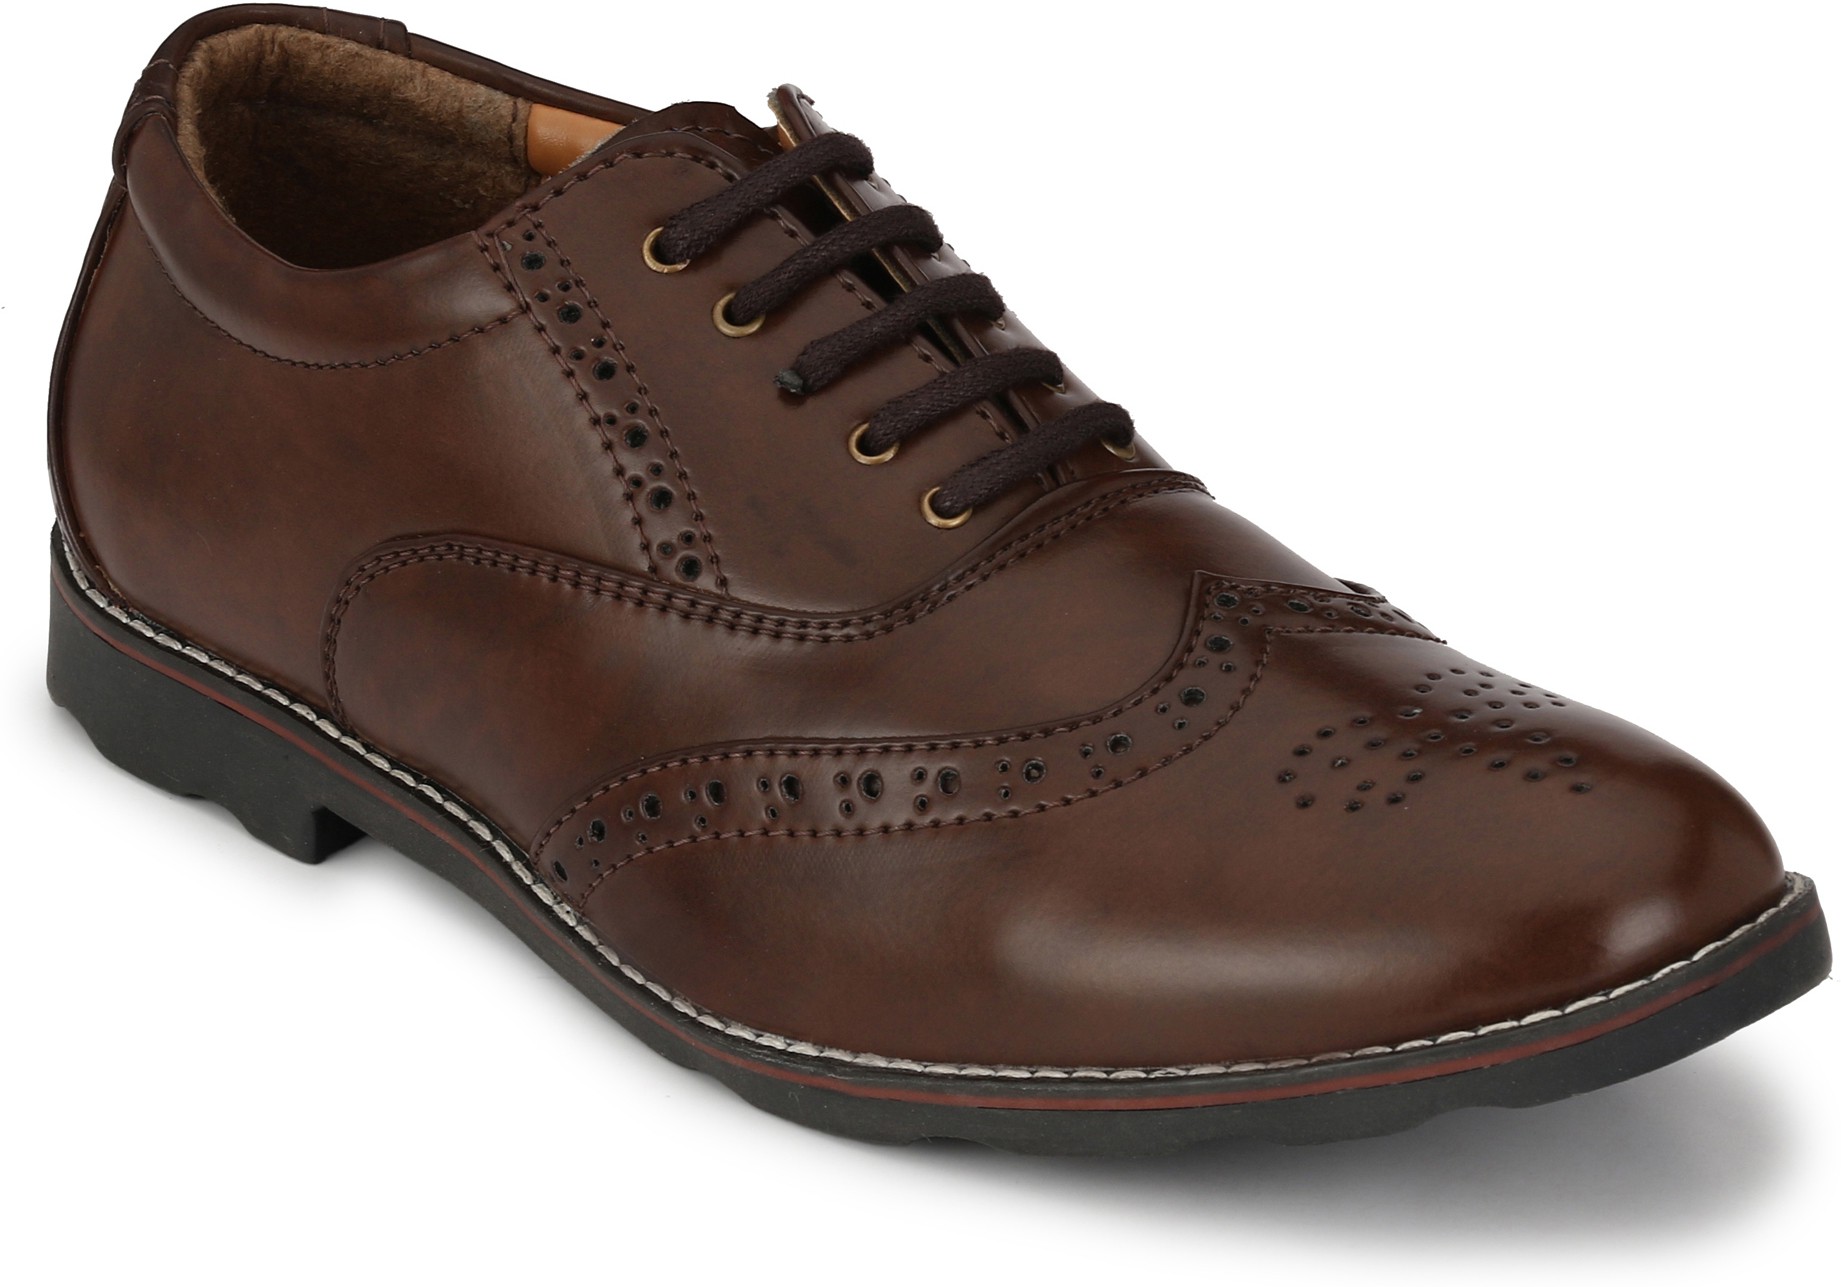 Prolific Imperial Lace Up(Brown)